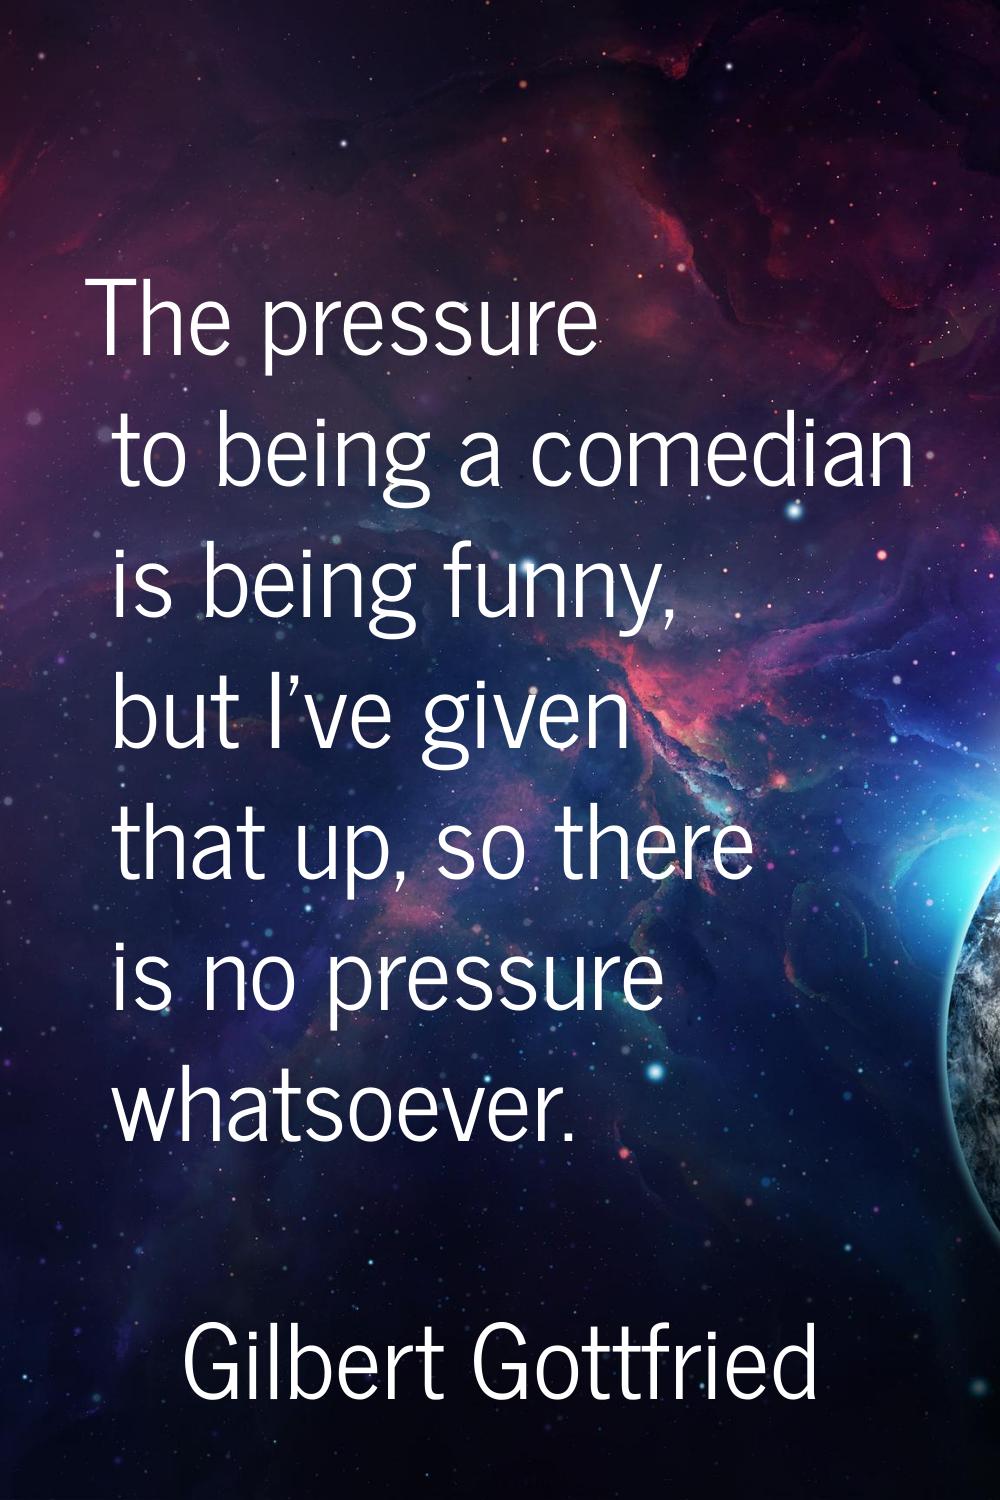 The pressure to being a comedian is being funny, but I've given that up, so there is no pressure wh